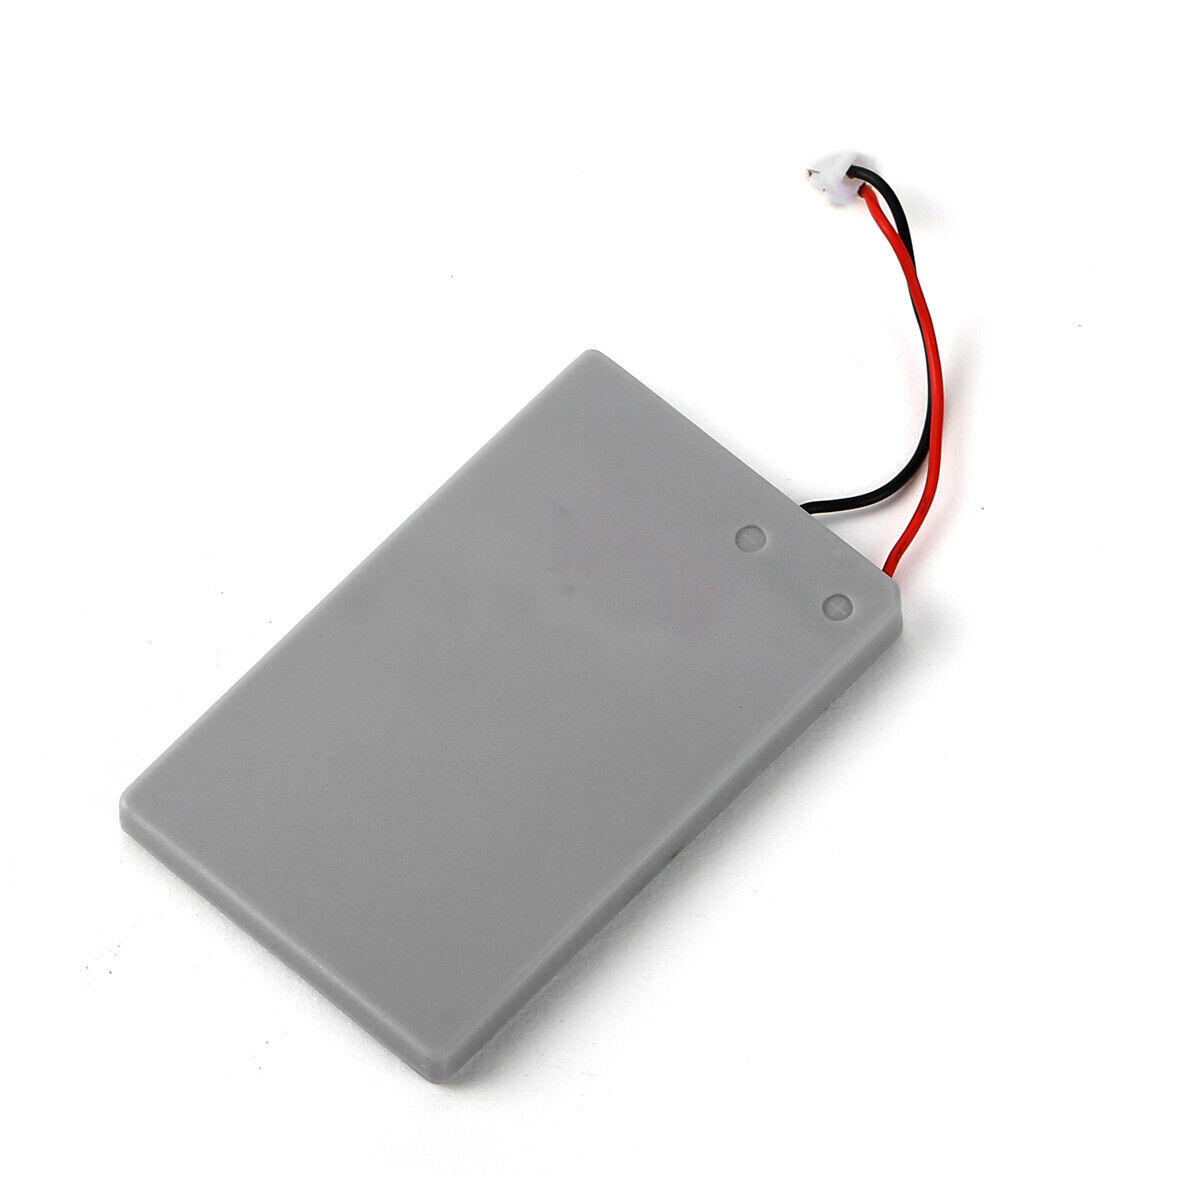 New 1800mAh Rechargeable Battery For Sony Playstation 3 PS3 Wireless Controller Unbranded - фотография #11